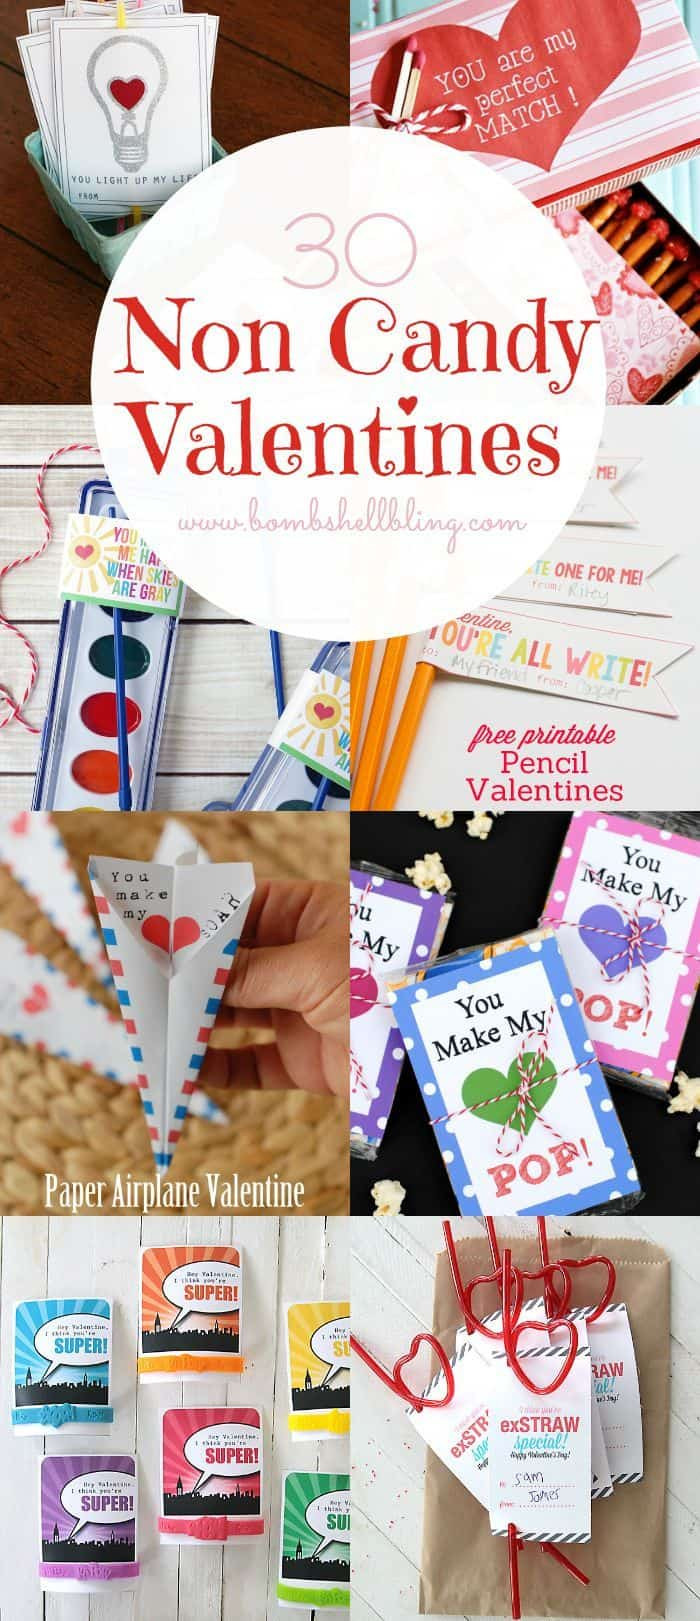 Toddler Valentine Gift Ideas
 10 Non Candy Valentine s Day Gift Ideas for Kids